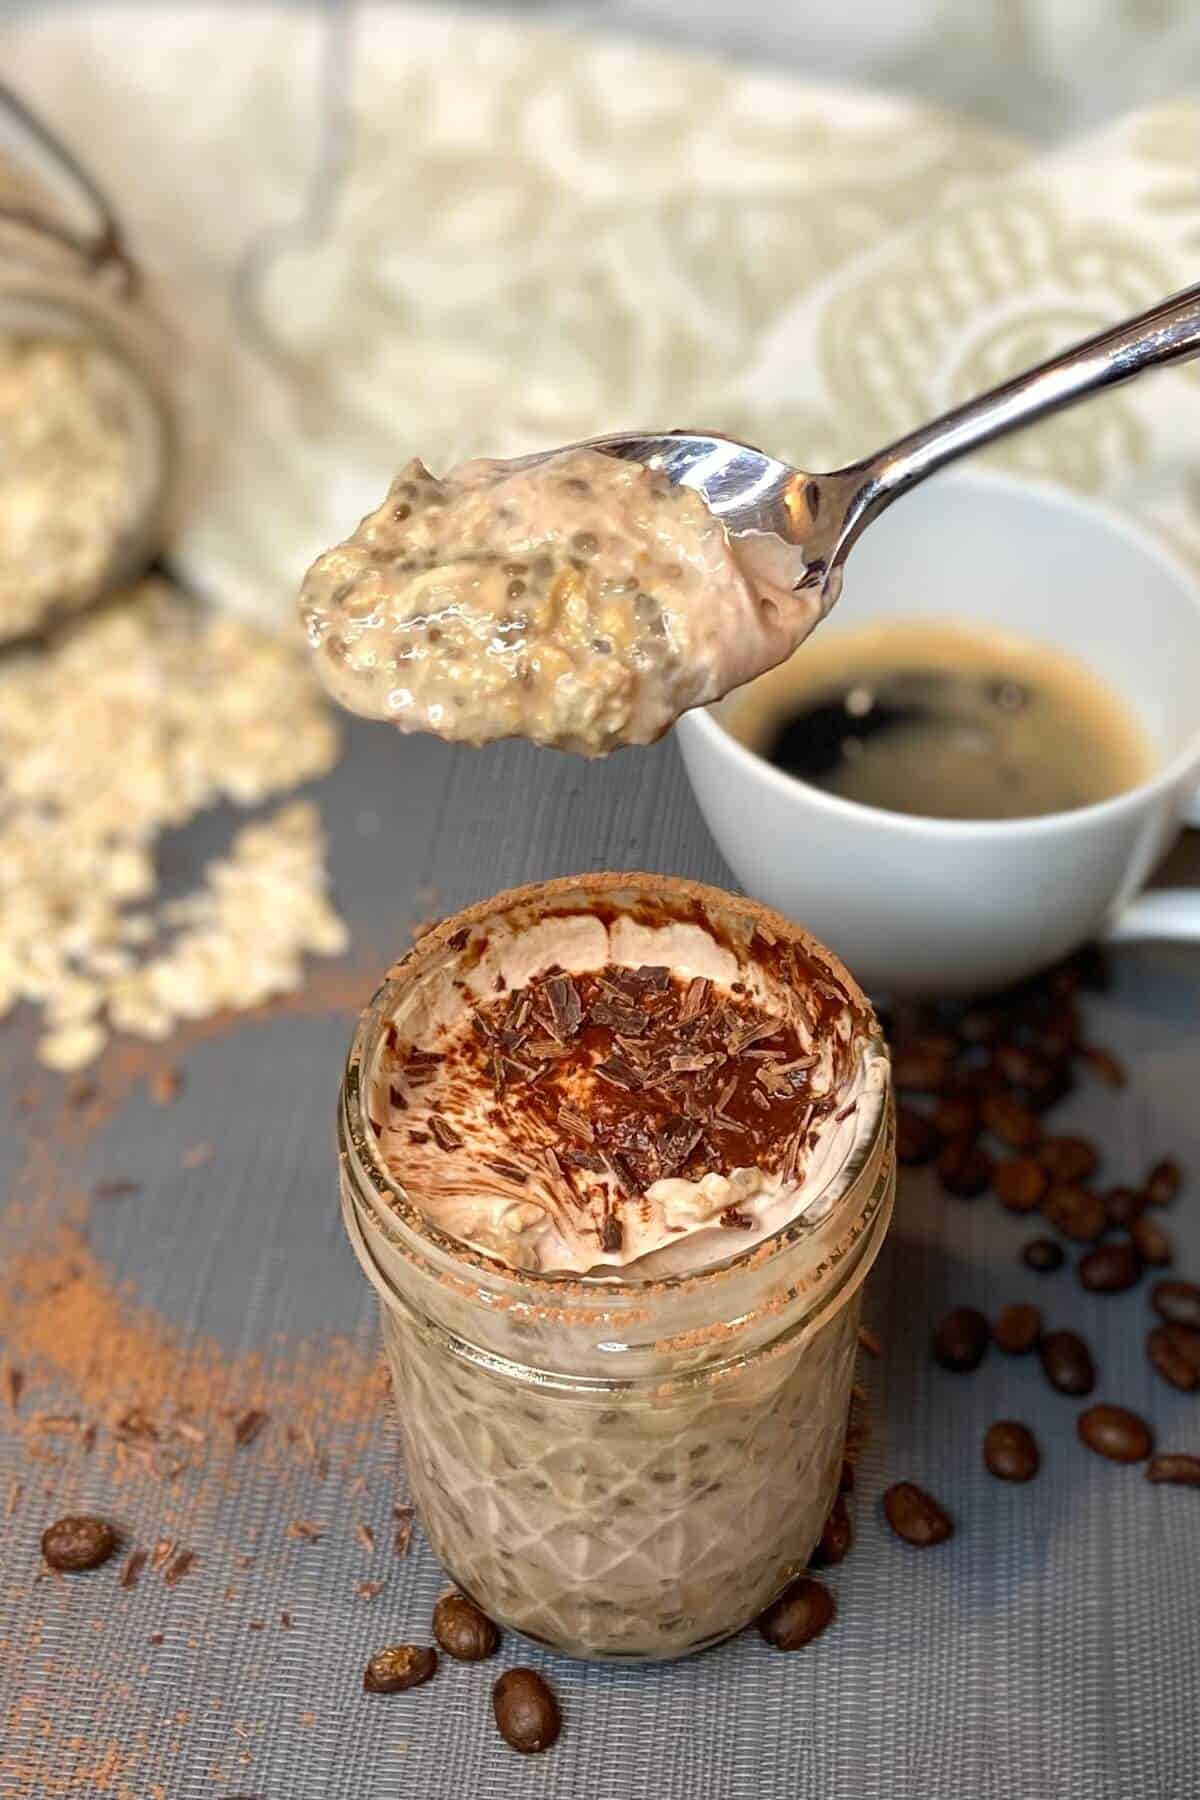 A spoonful of overnight oats, ready to enjoy.